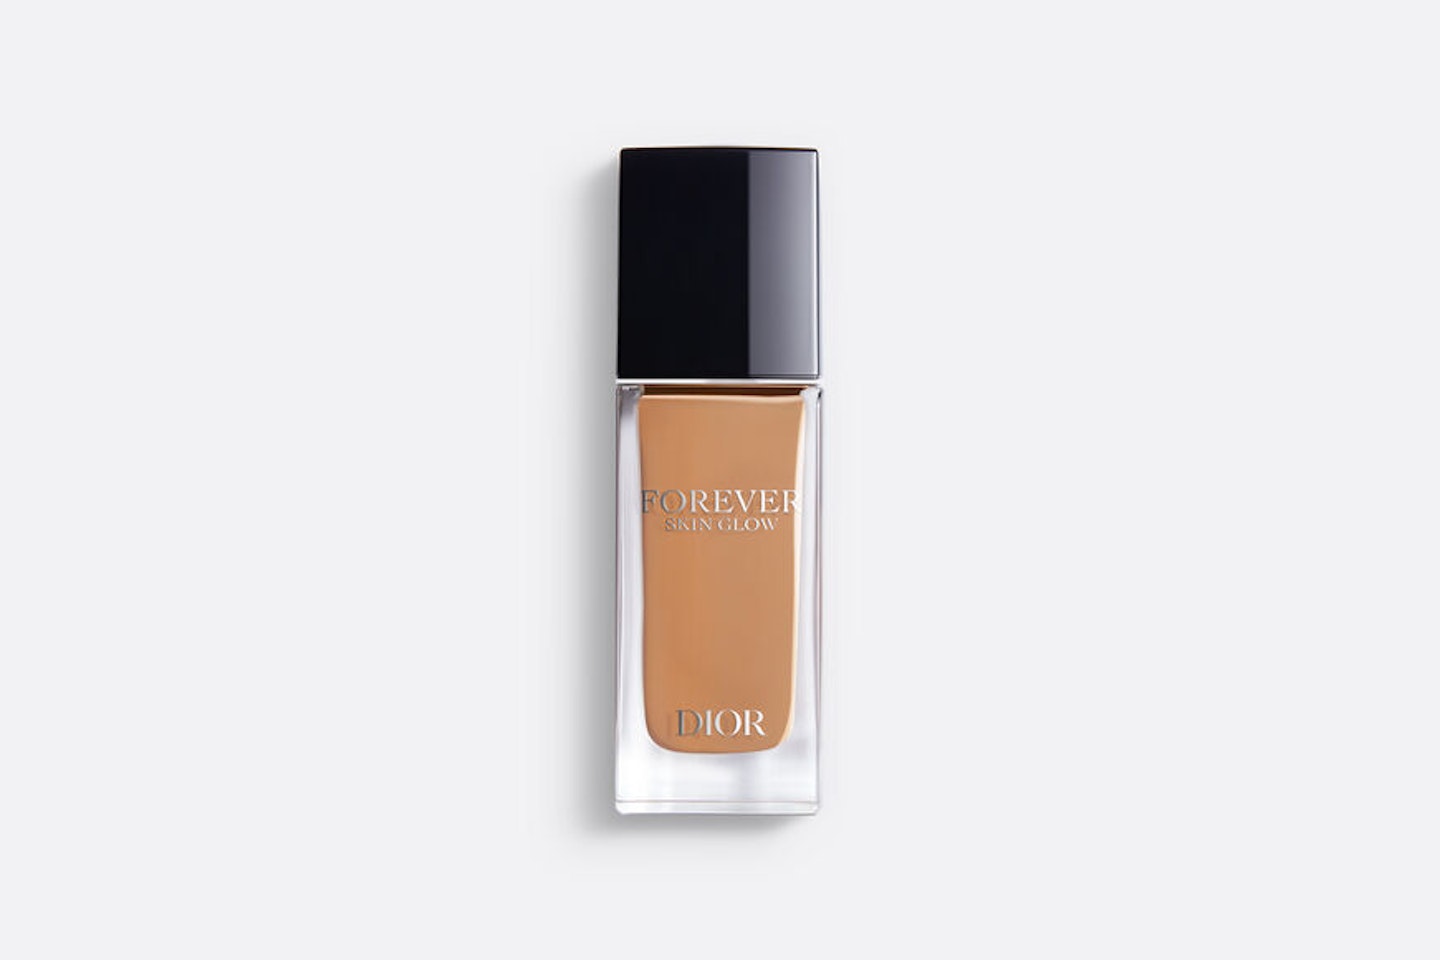 Dior Forever Skin Glow Foundation (available in 42 shades)